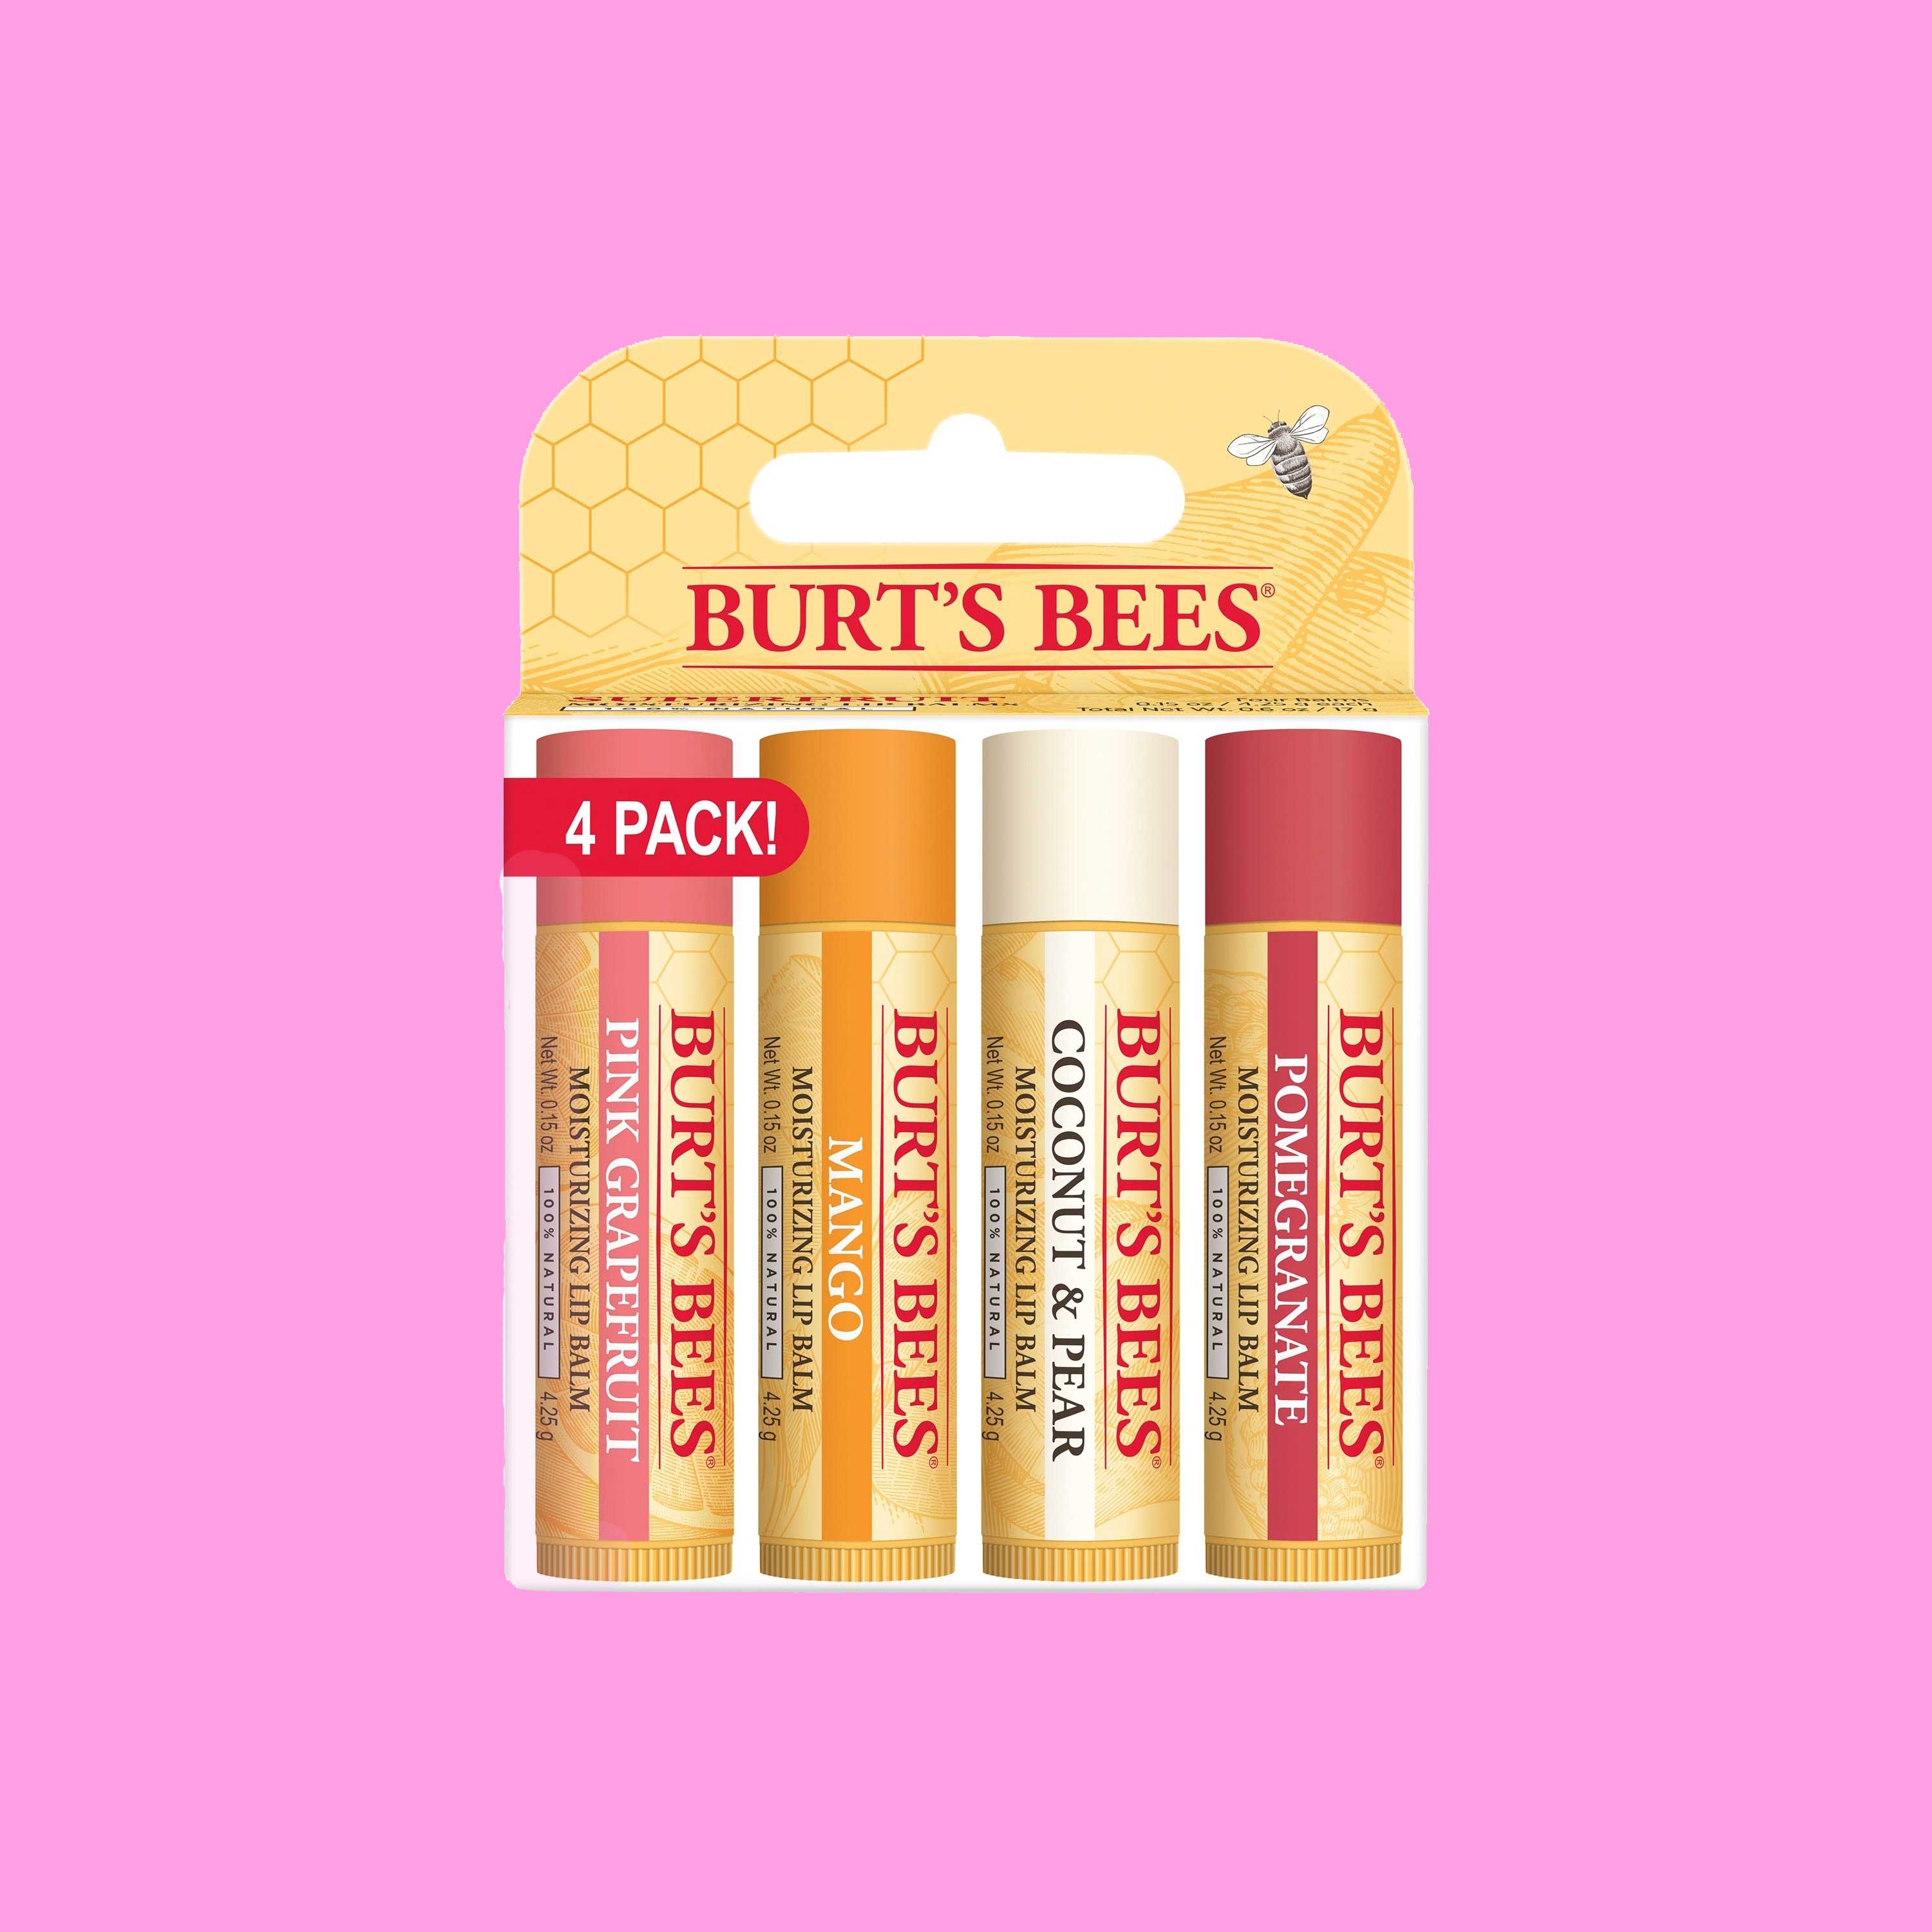 7 Long Lasting Lip Balms You Won't Need To Reapply
